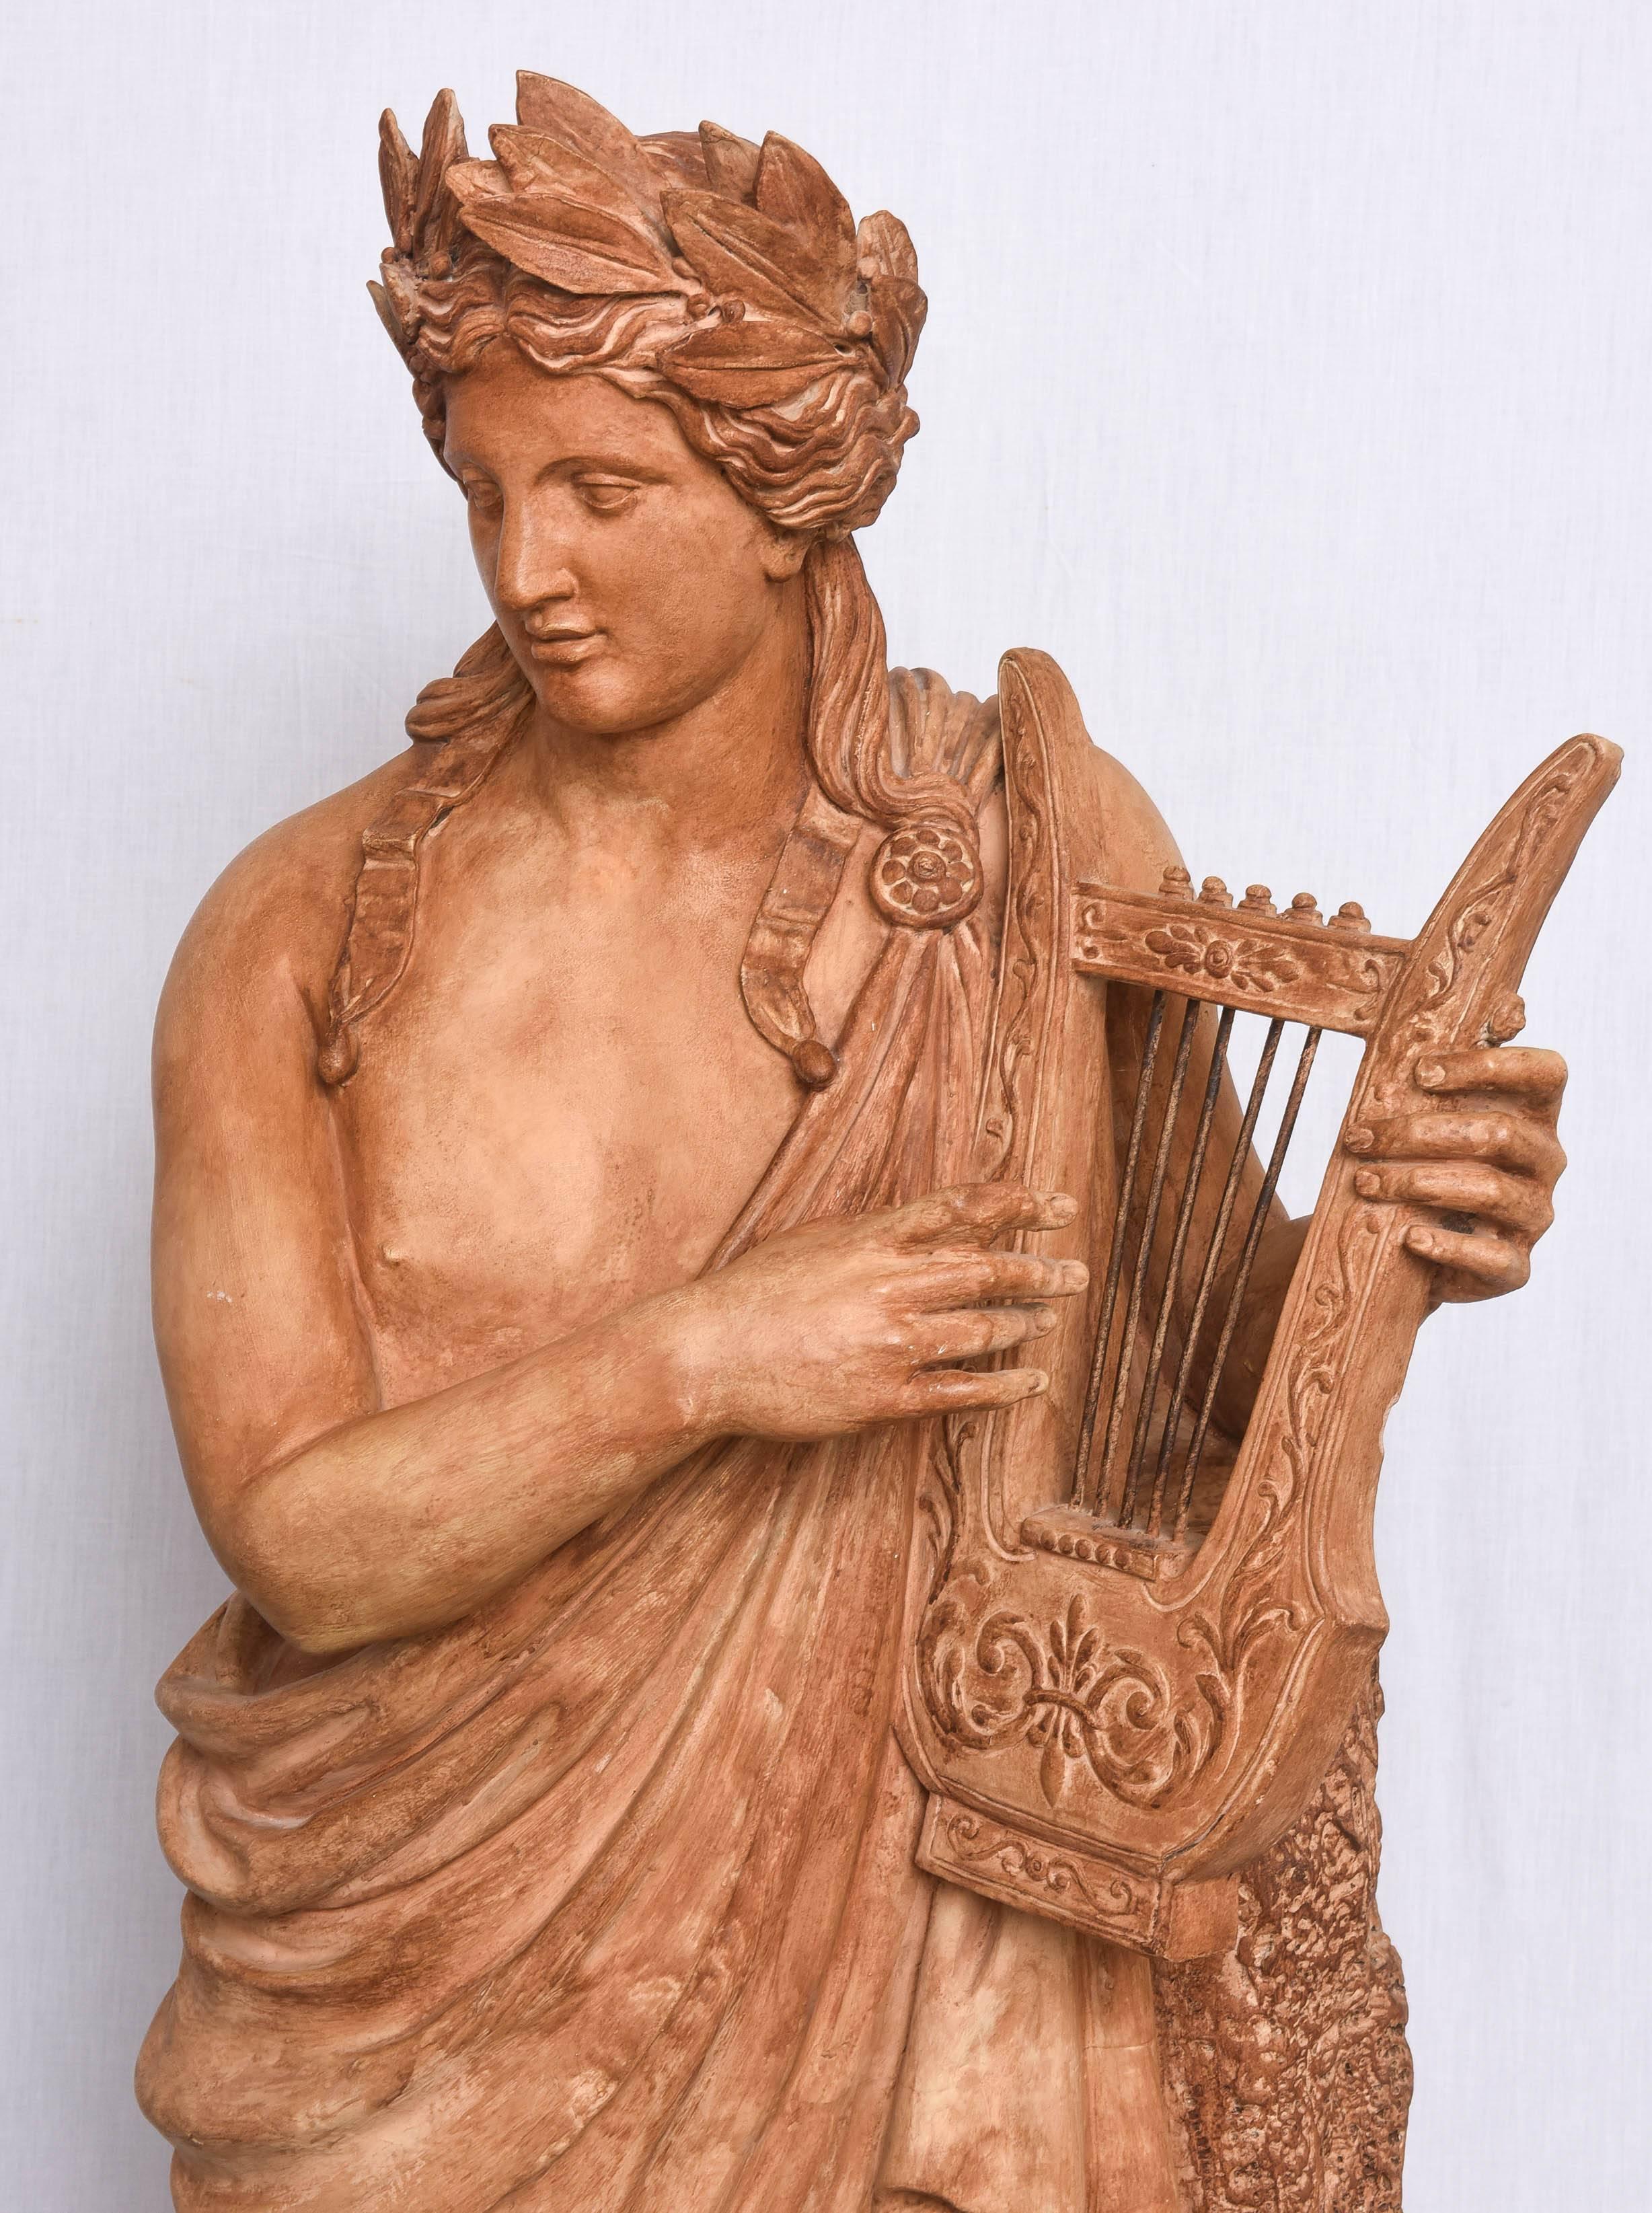 This amazing 19th century Italian terra cotta garden statue of the Greek god Apollo playing a lyre will make the perfect addition to your garden or perhaps your garden room. The piece is perhaps a Roman copy of a Greek sculpture with his crown of